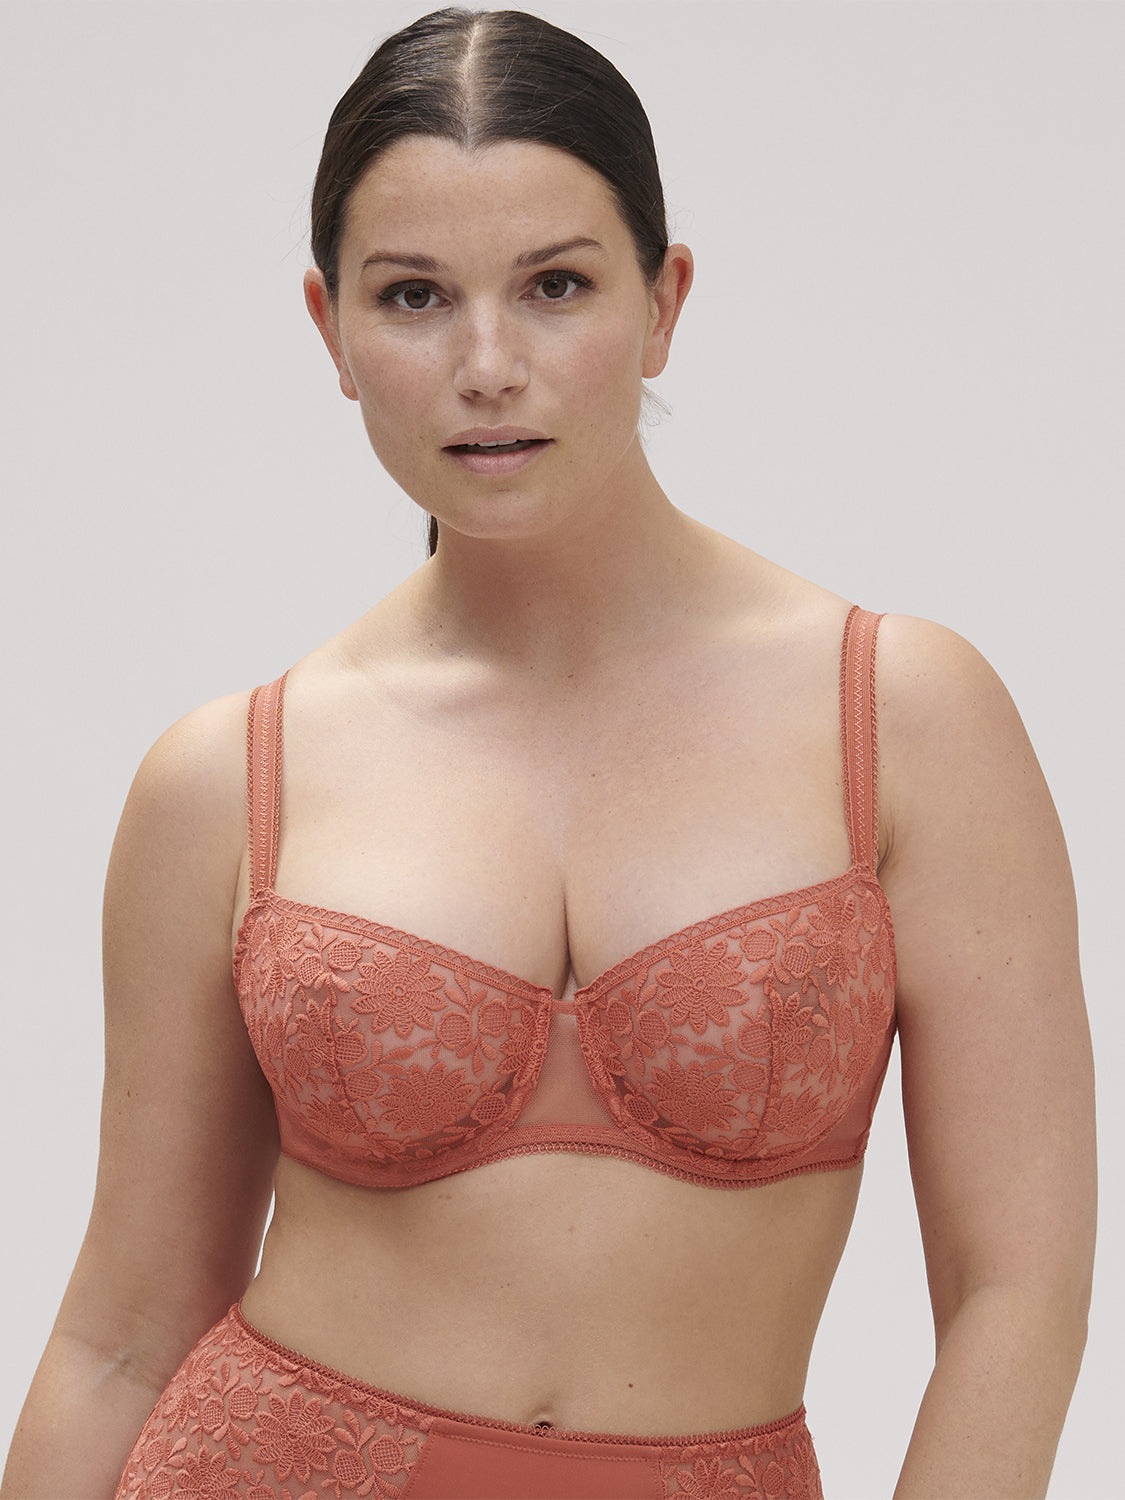 Simone Perele Java Sheer Plunge Bra in Anthracite FINAL SALE (50% Off) -  Busted Bra Shop